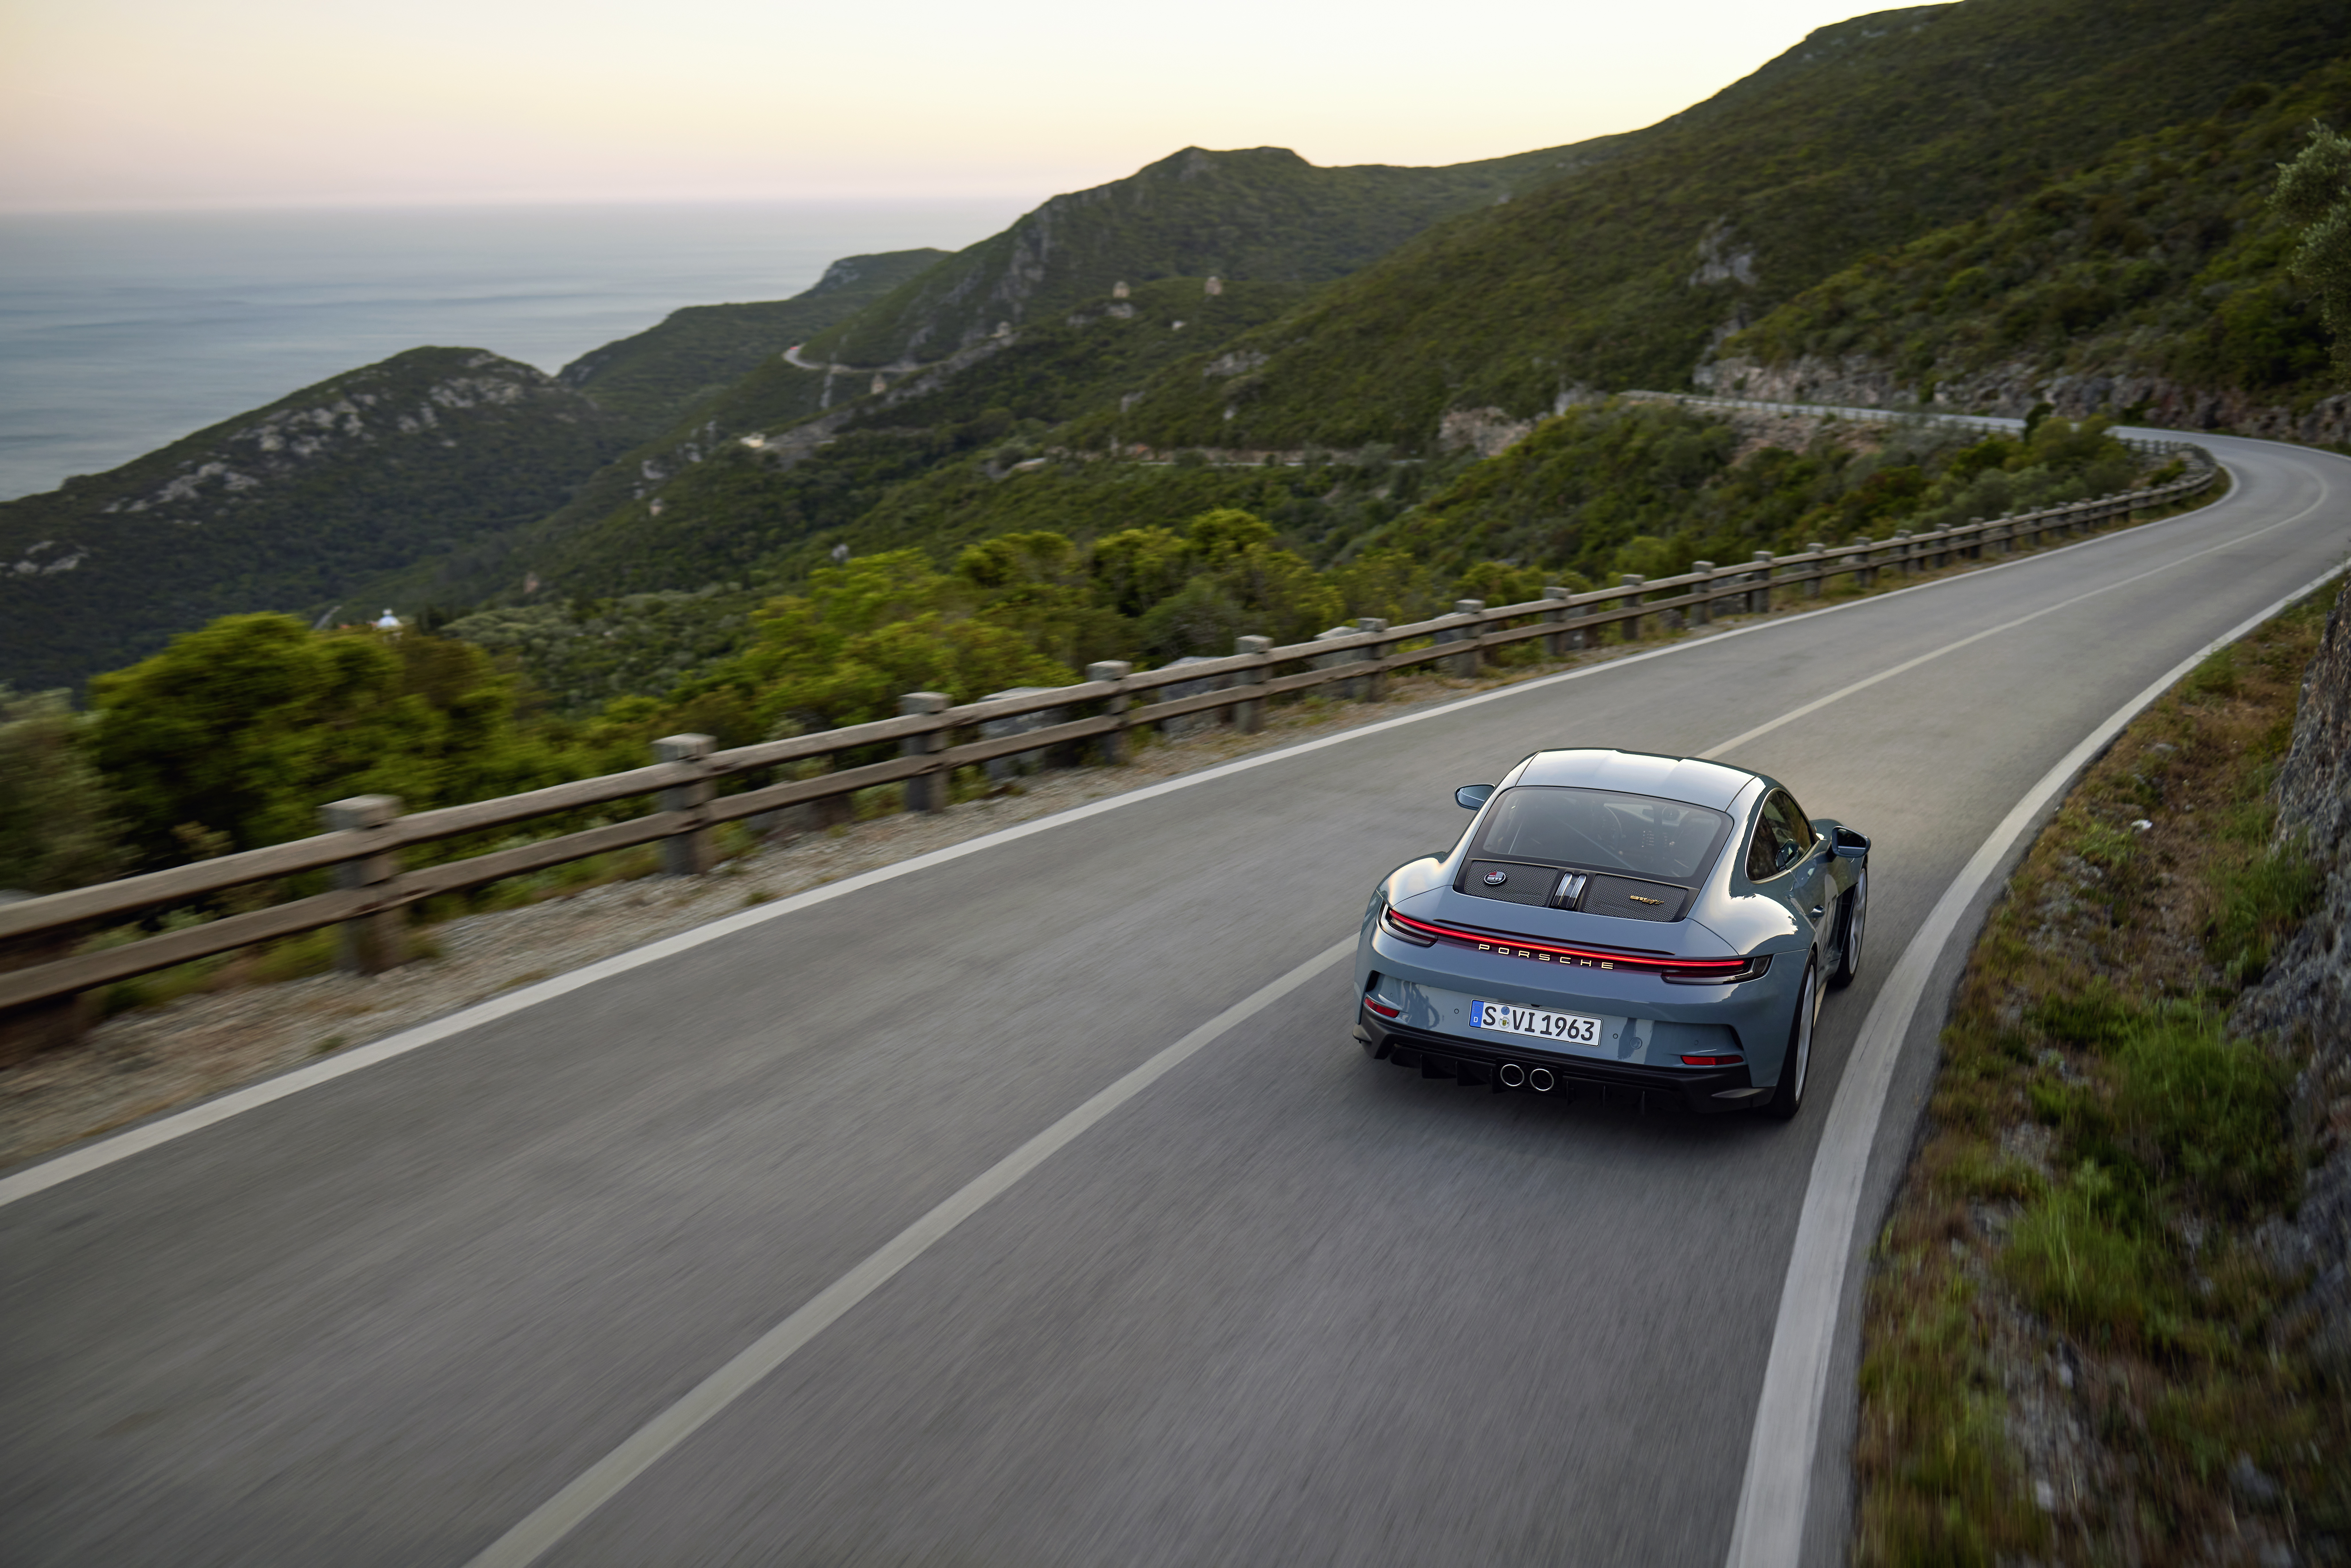 Rear view of Porsche 911 S/T driving on coastal road